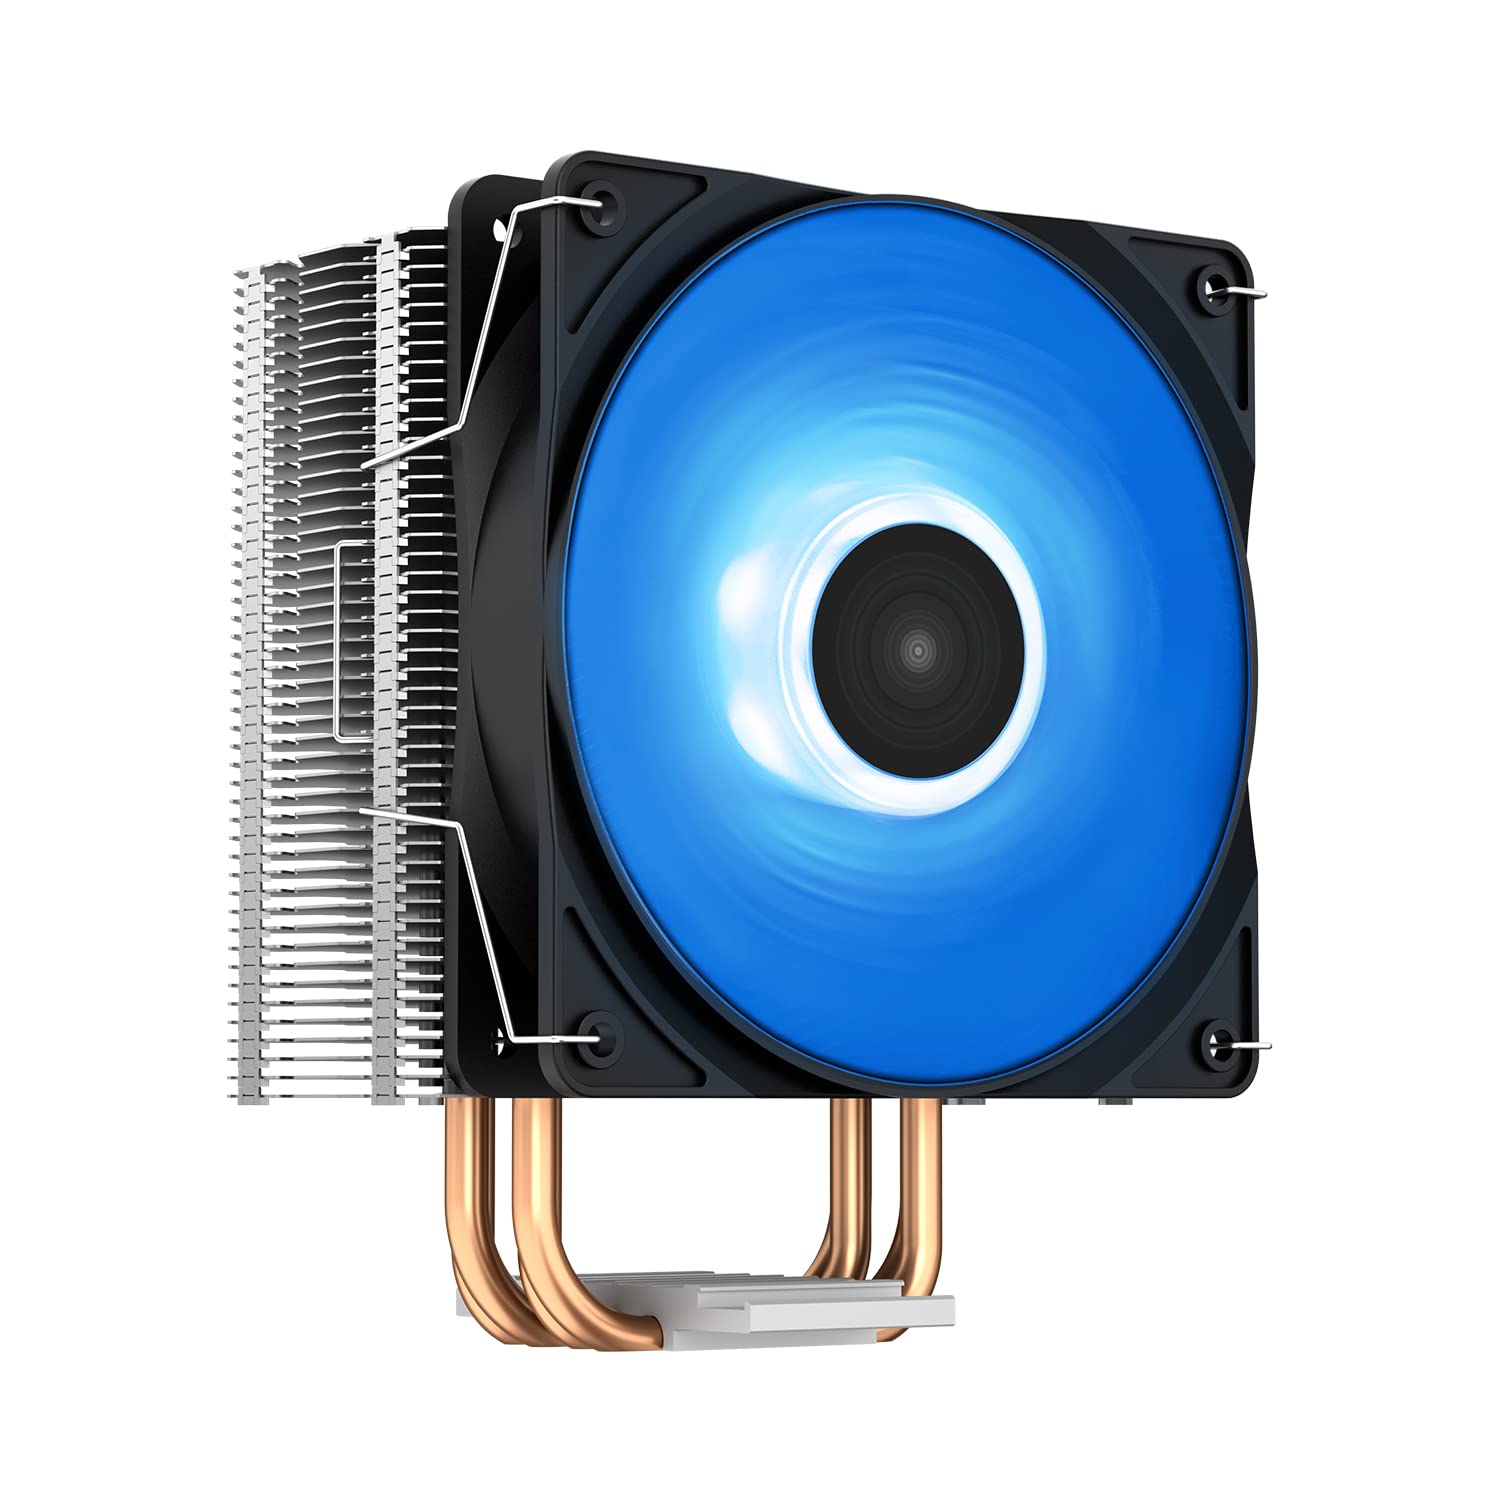 DEEP Cool GAMMAXX400V2 Blue CPU Air Cooler with 4 Heatpipes, 120mm PWM Fan and Blue LED for Intel/AMD CPUs (AM4 Compatible) (GAMMAXX 400 V2 Blue)